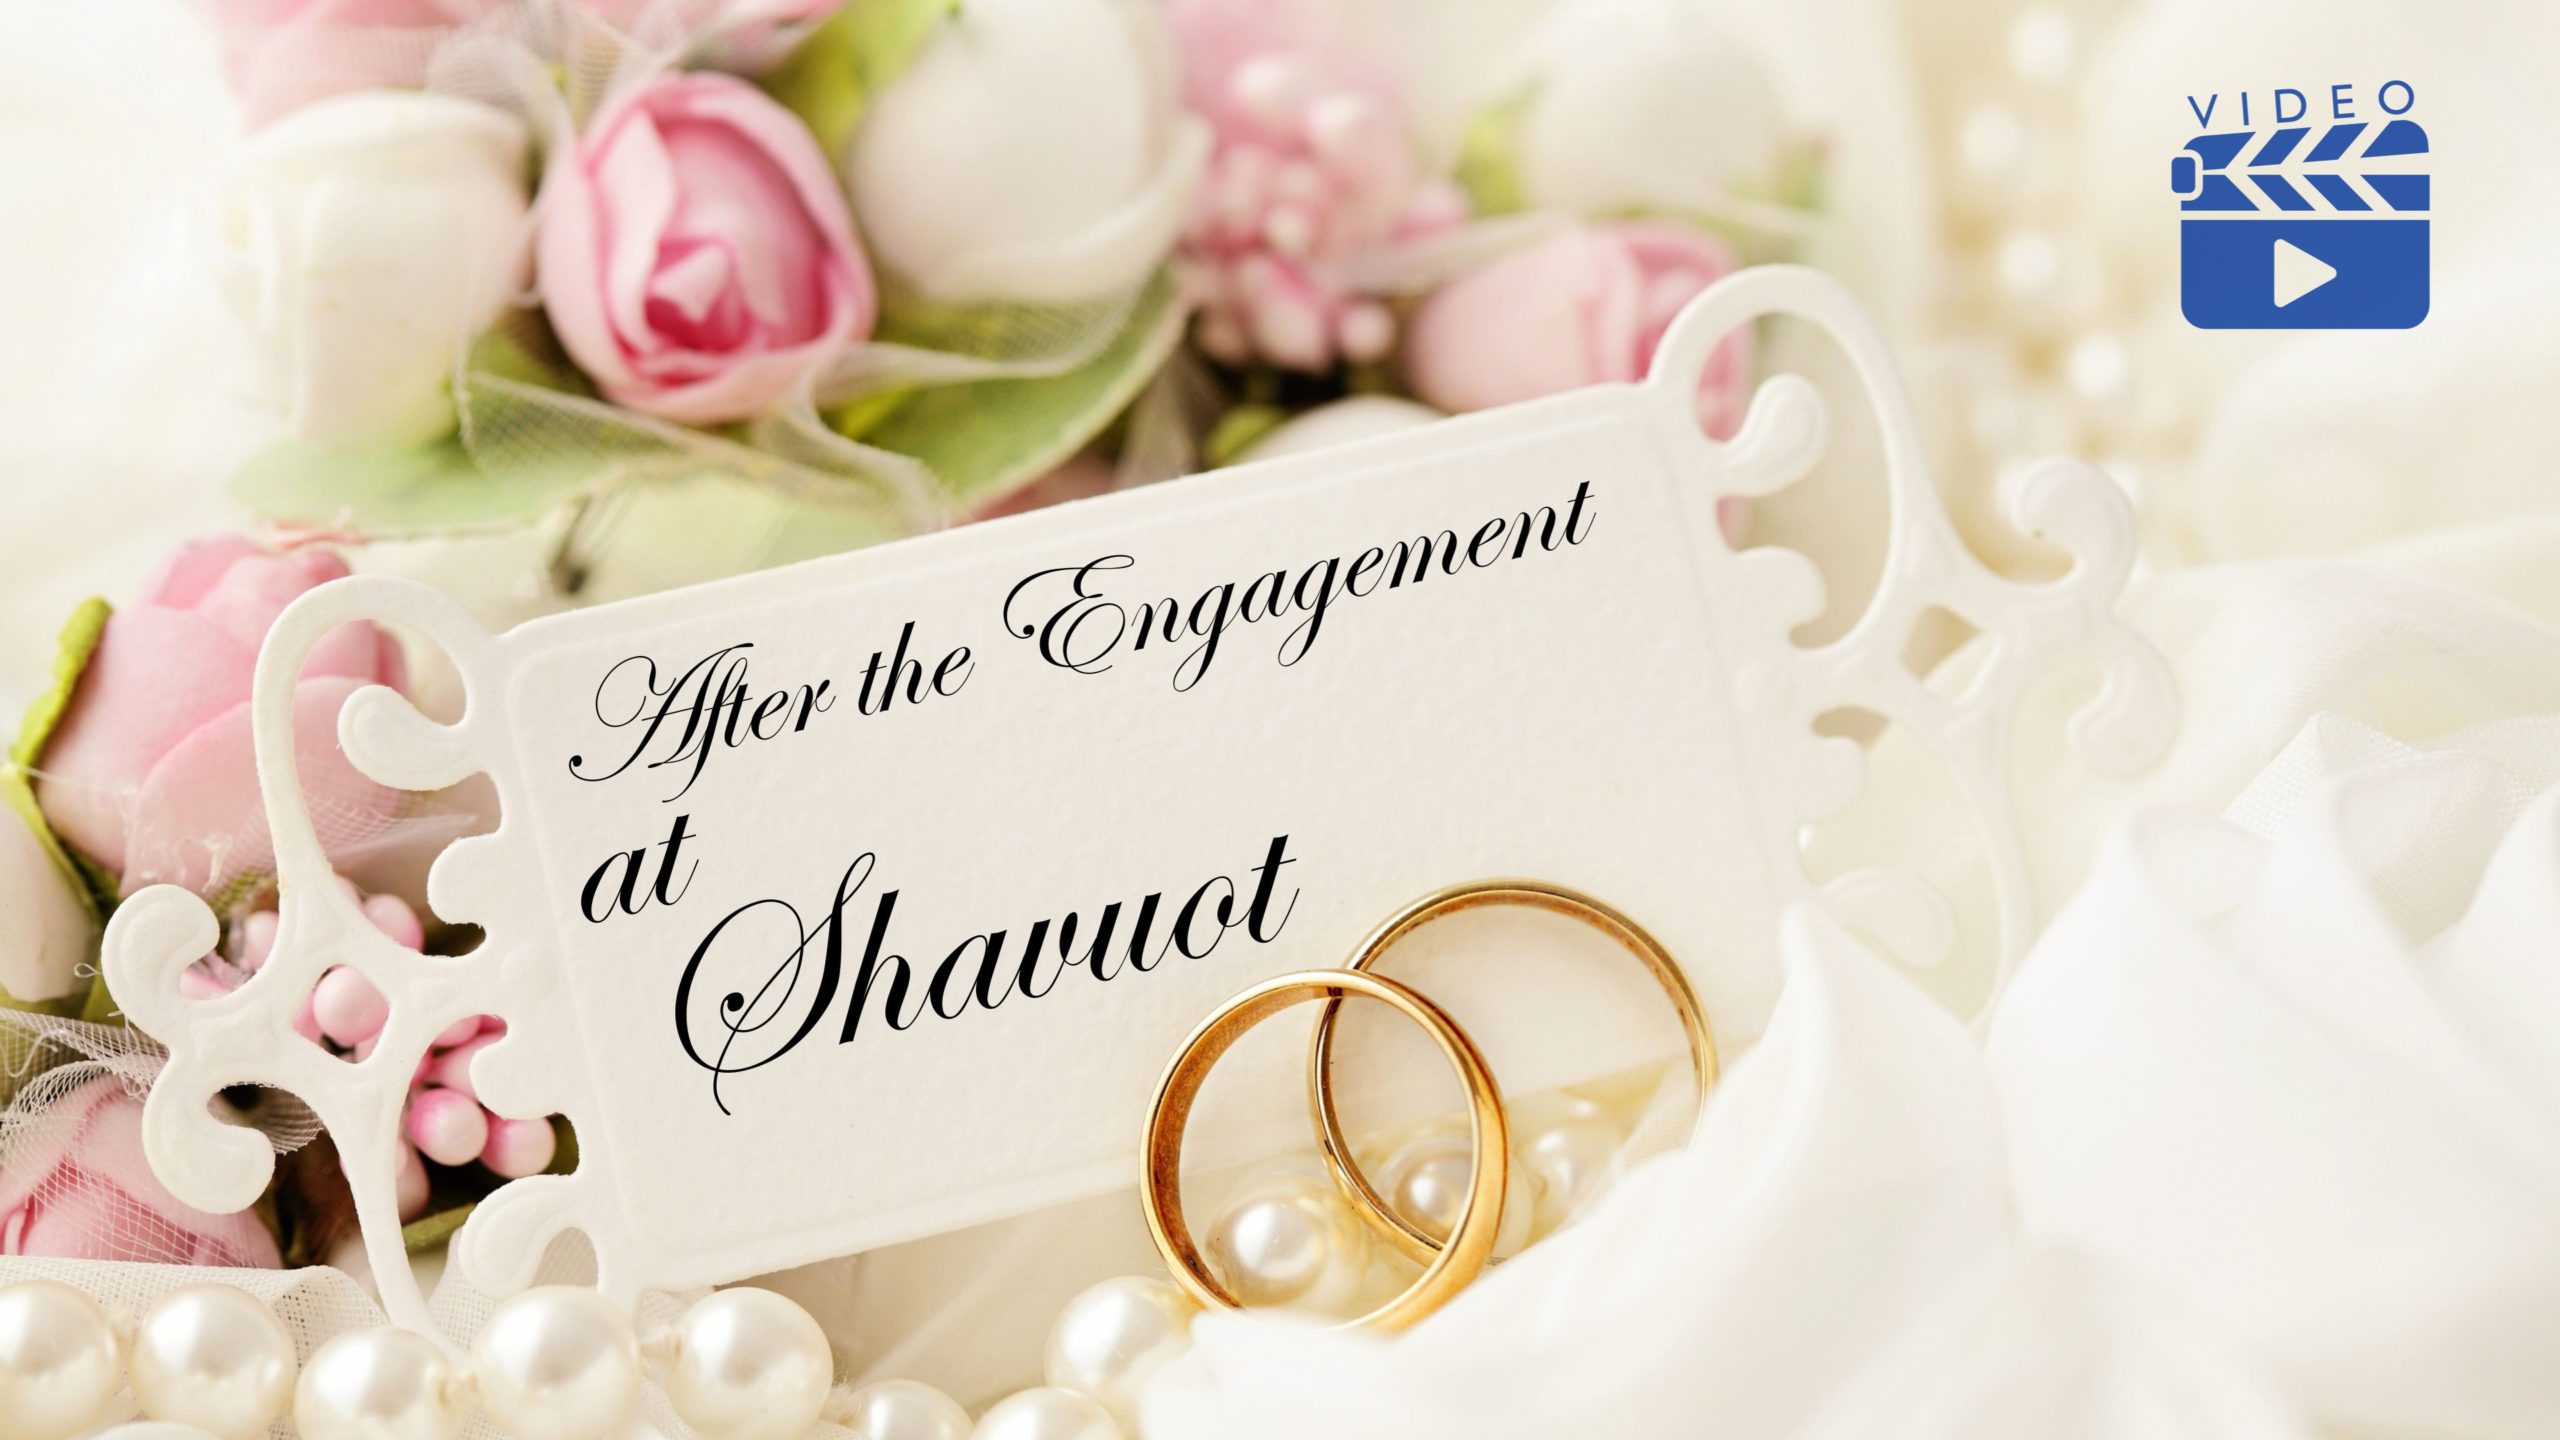 After the Engagement at Shavuot